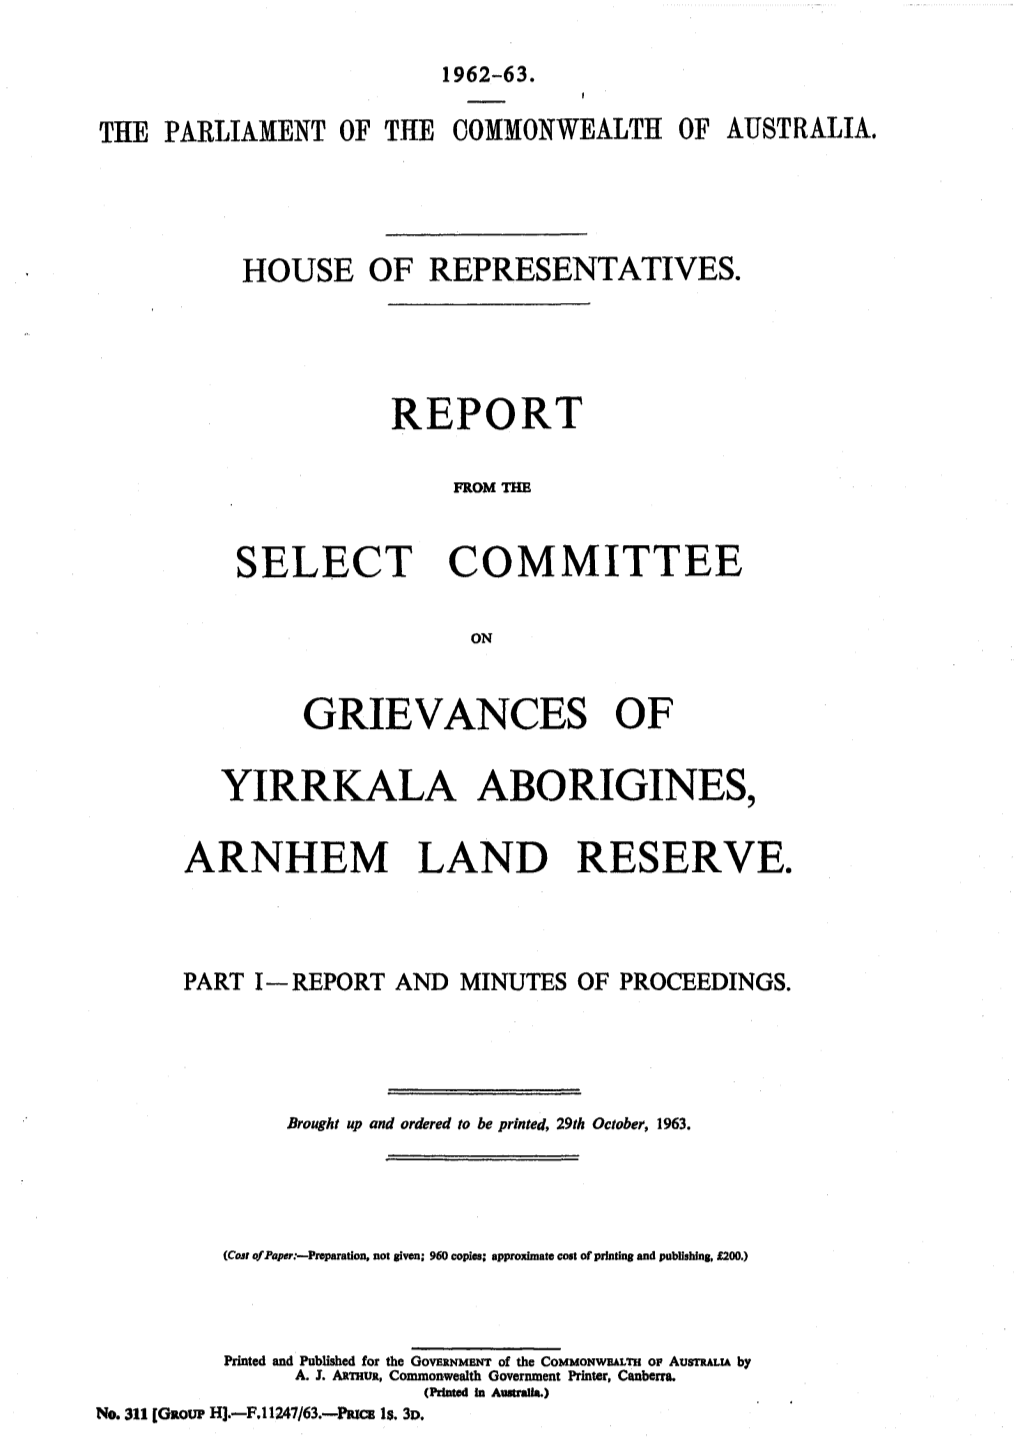 Report from the Select Committee on Grievances of Yirrkala Aborigines, Arnhem Land Reserve